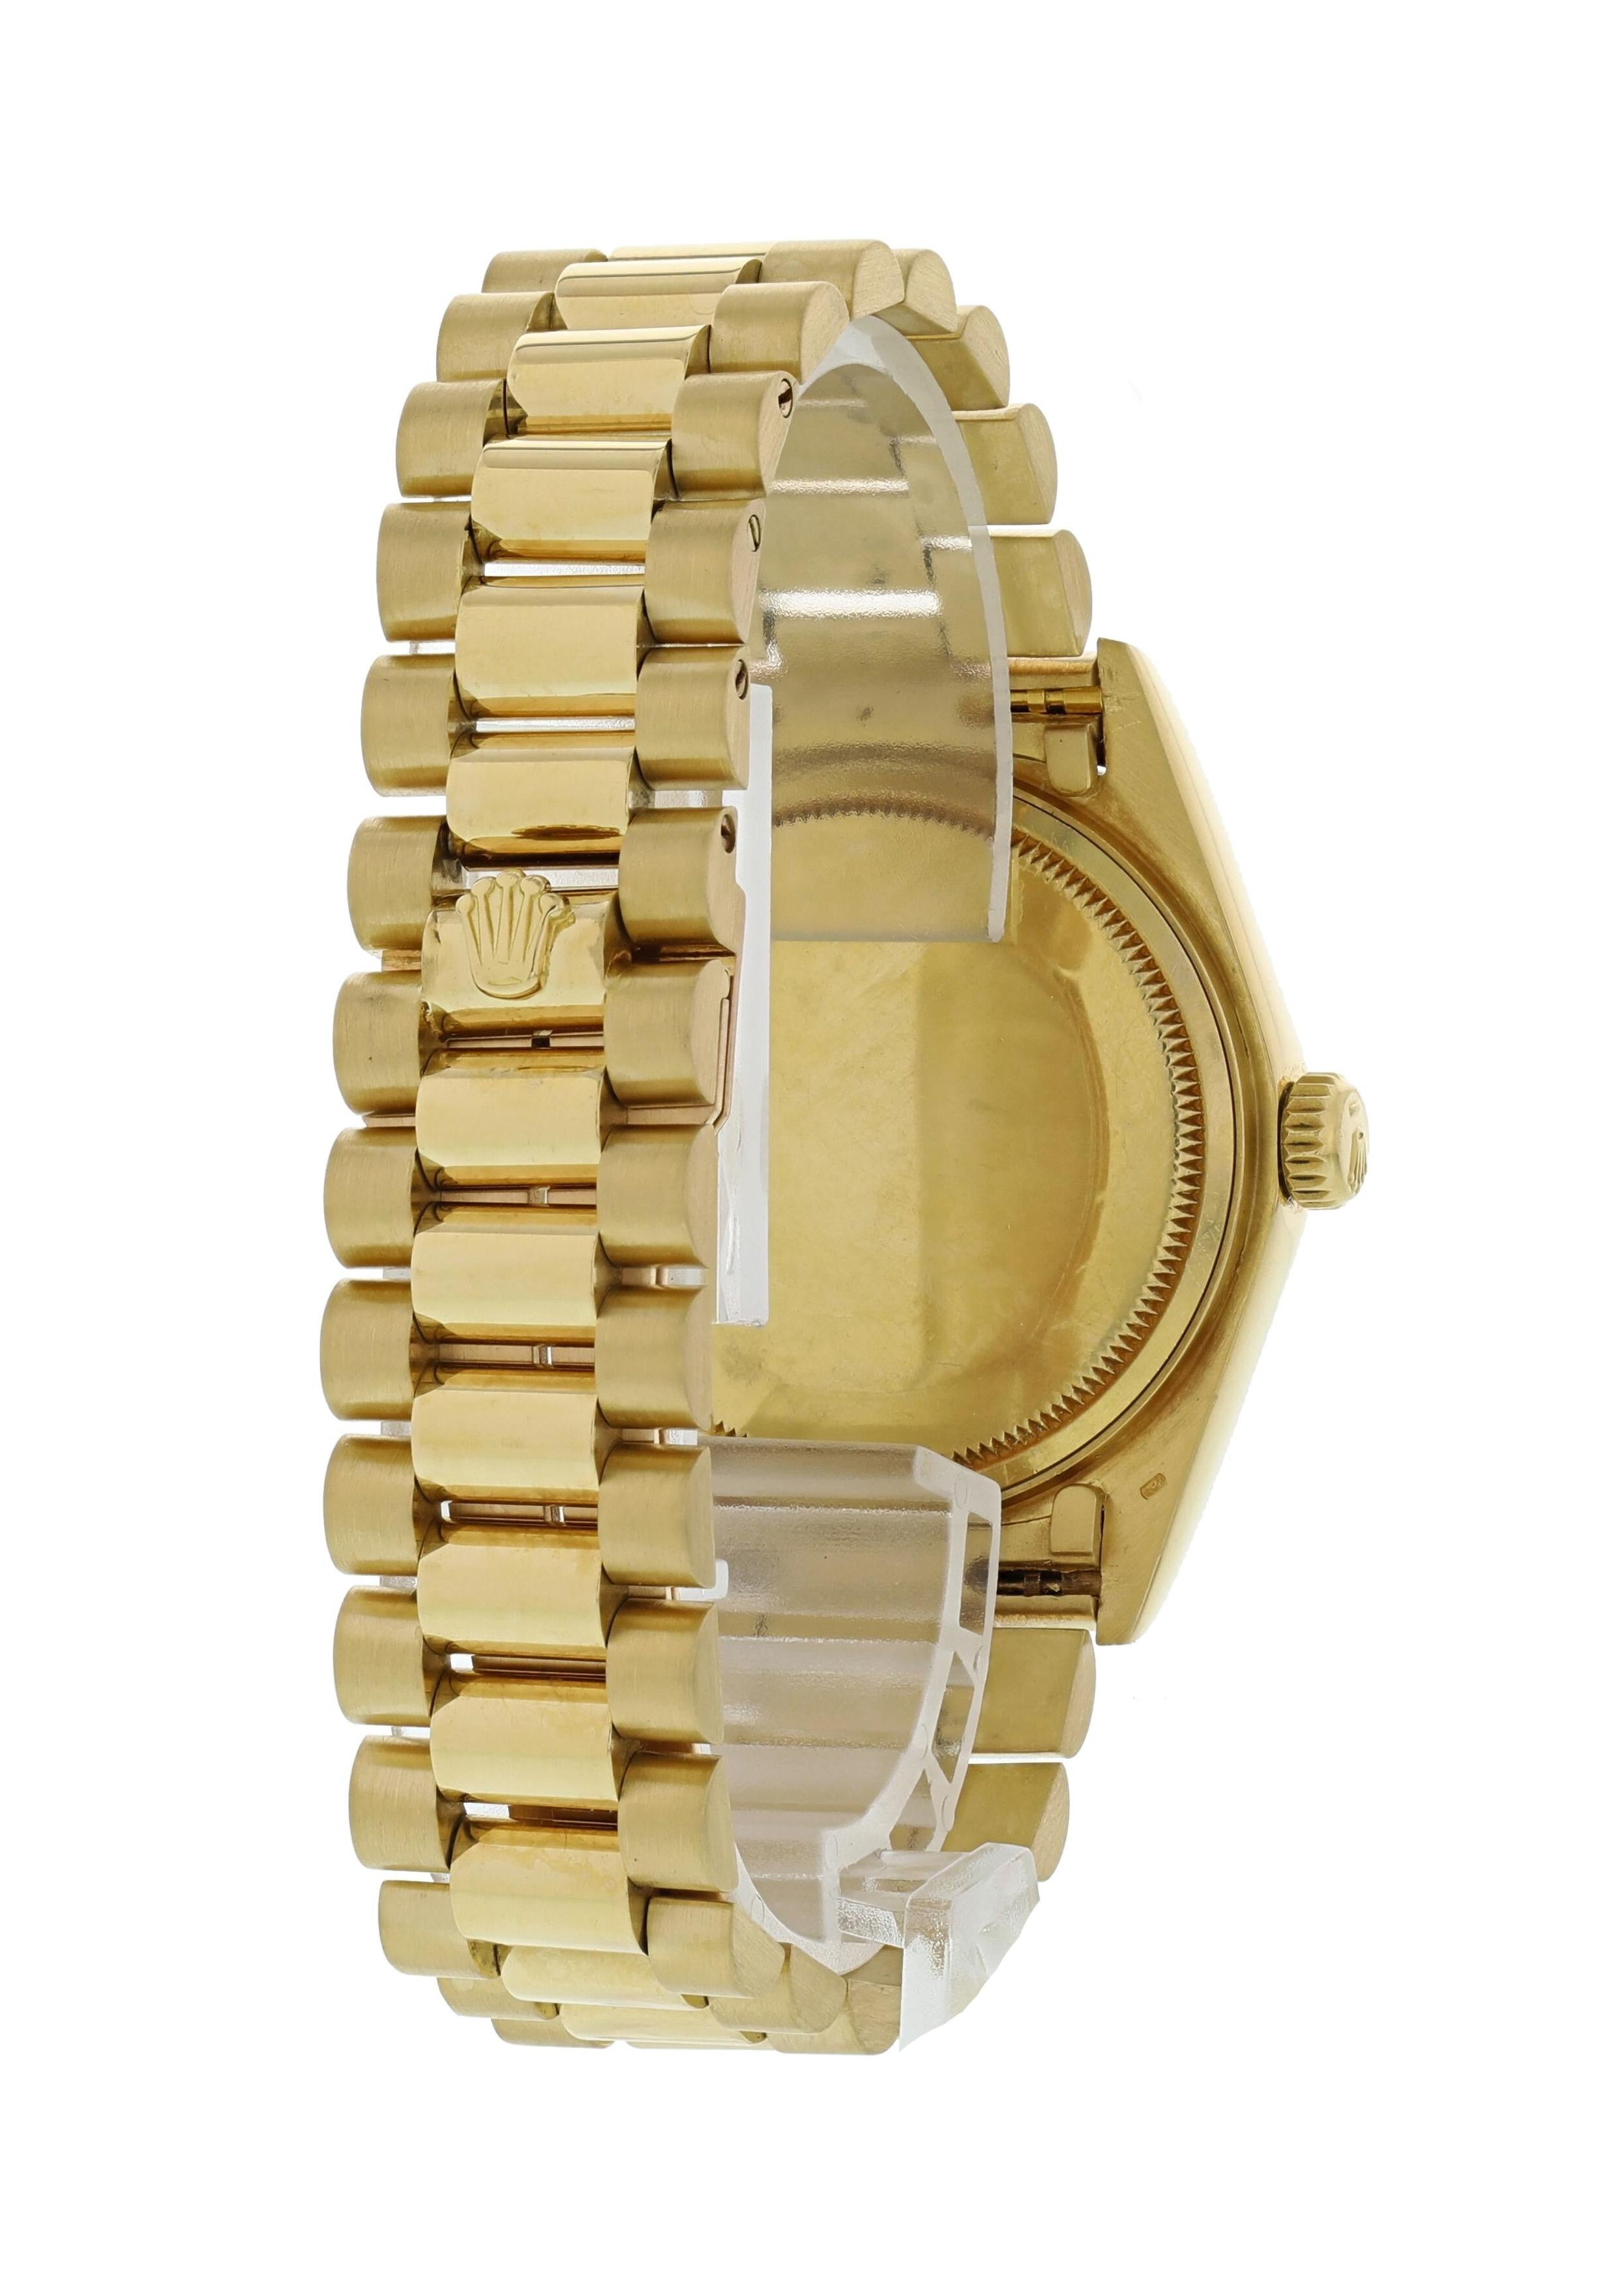 Rolex Day-Date President 18038 Wood Dial 18 Karat Yellow Gold Men's Watch For Sale 1